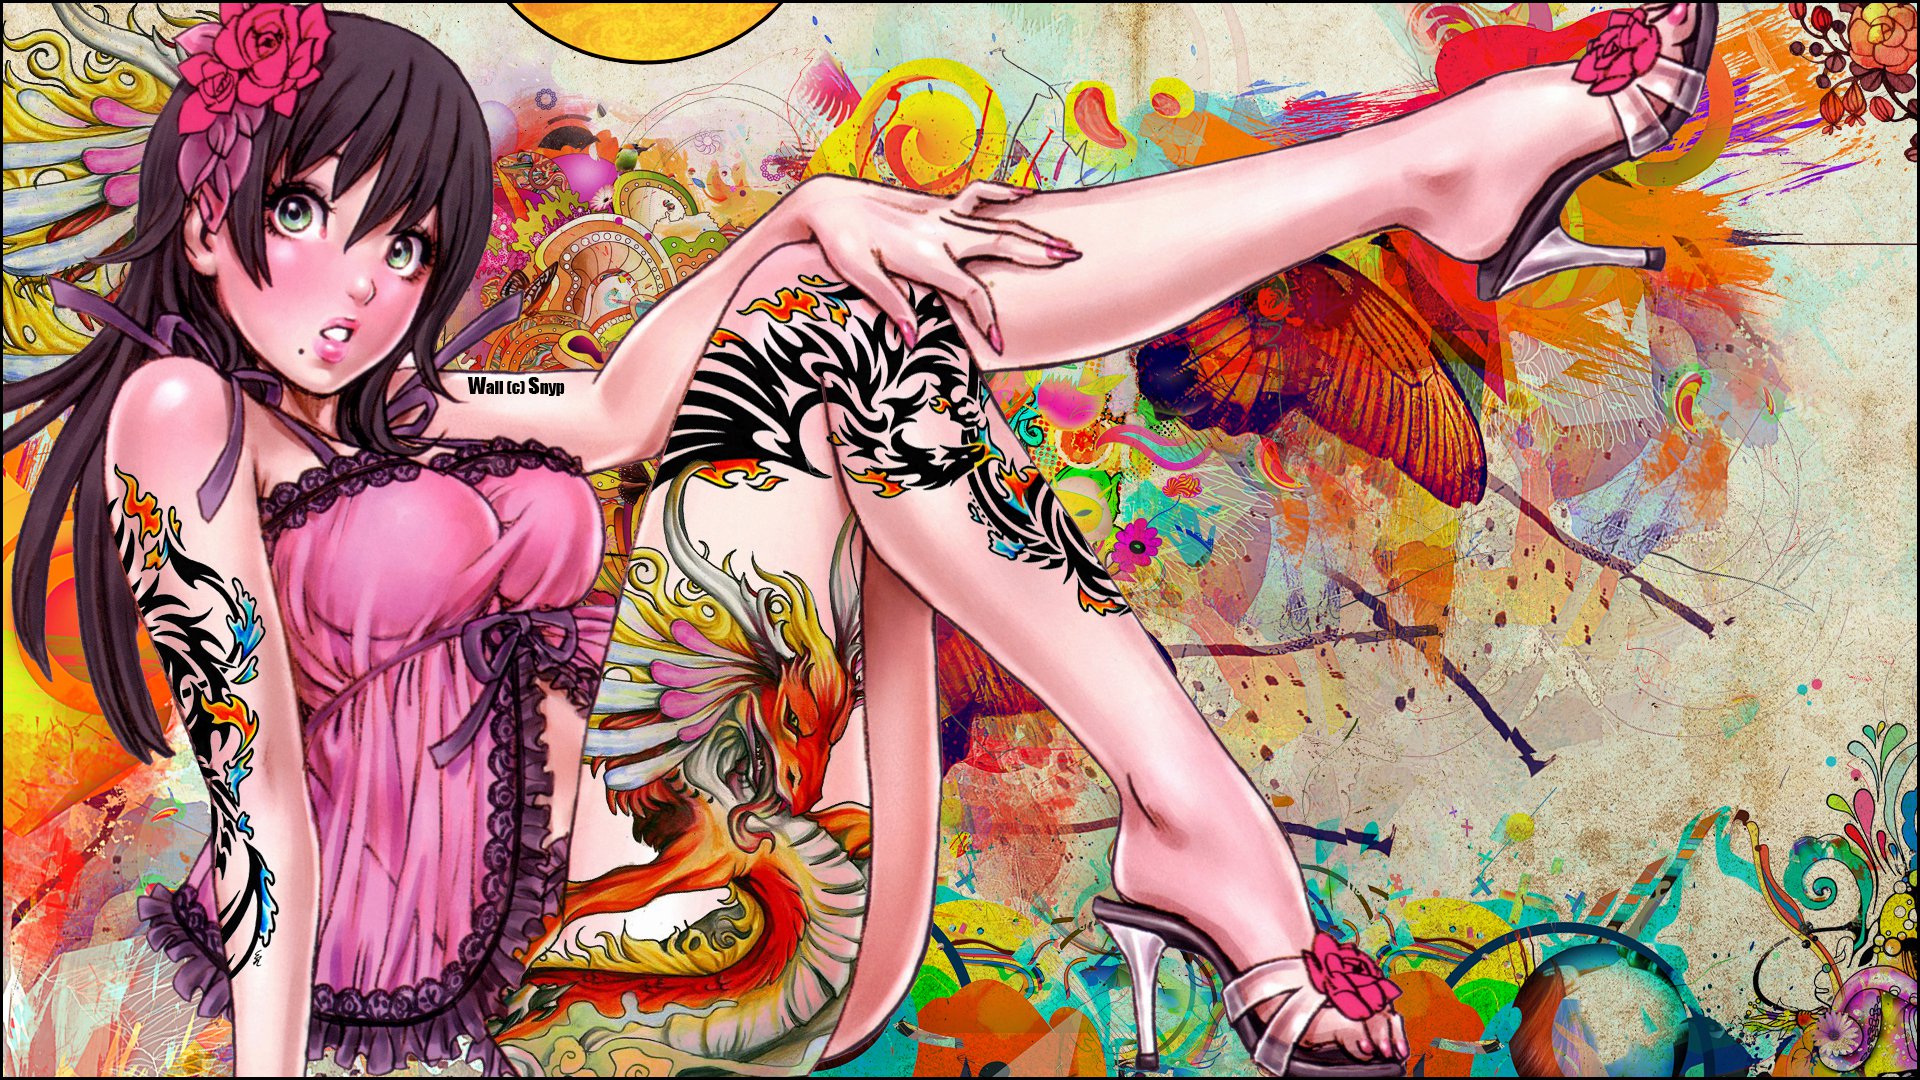 Anime 1920x1080 anime original characters anime girls colorful Snyp ecchi tattoo big boobs legs high heels boobs inked girls flower in hair legs up stilettoes heels flowers lingerie looking at viewer women green eyes painted nails